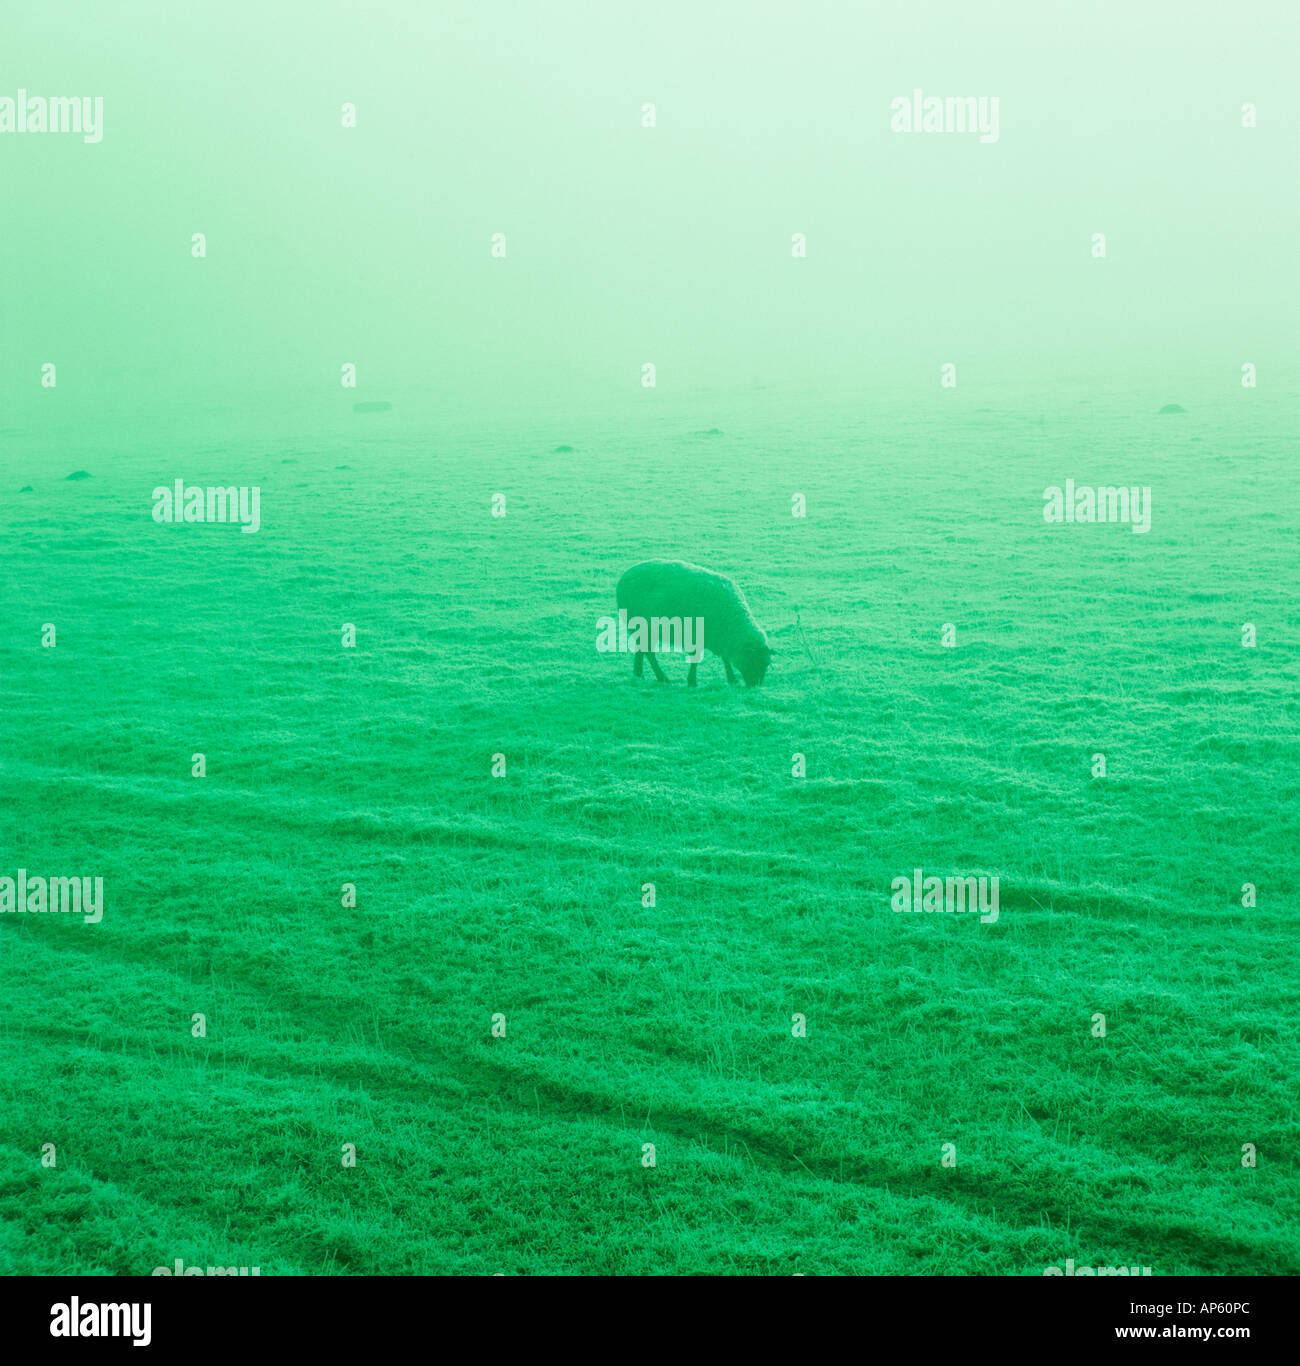 Single Sheep in Mist in Frosty Field Tinted Green Stock Photo